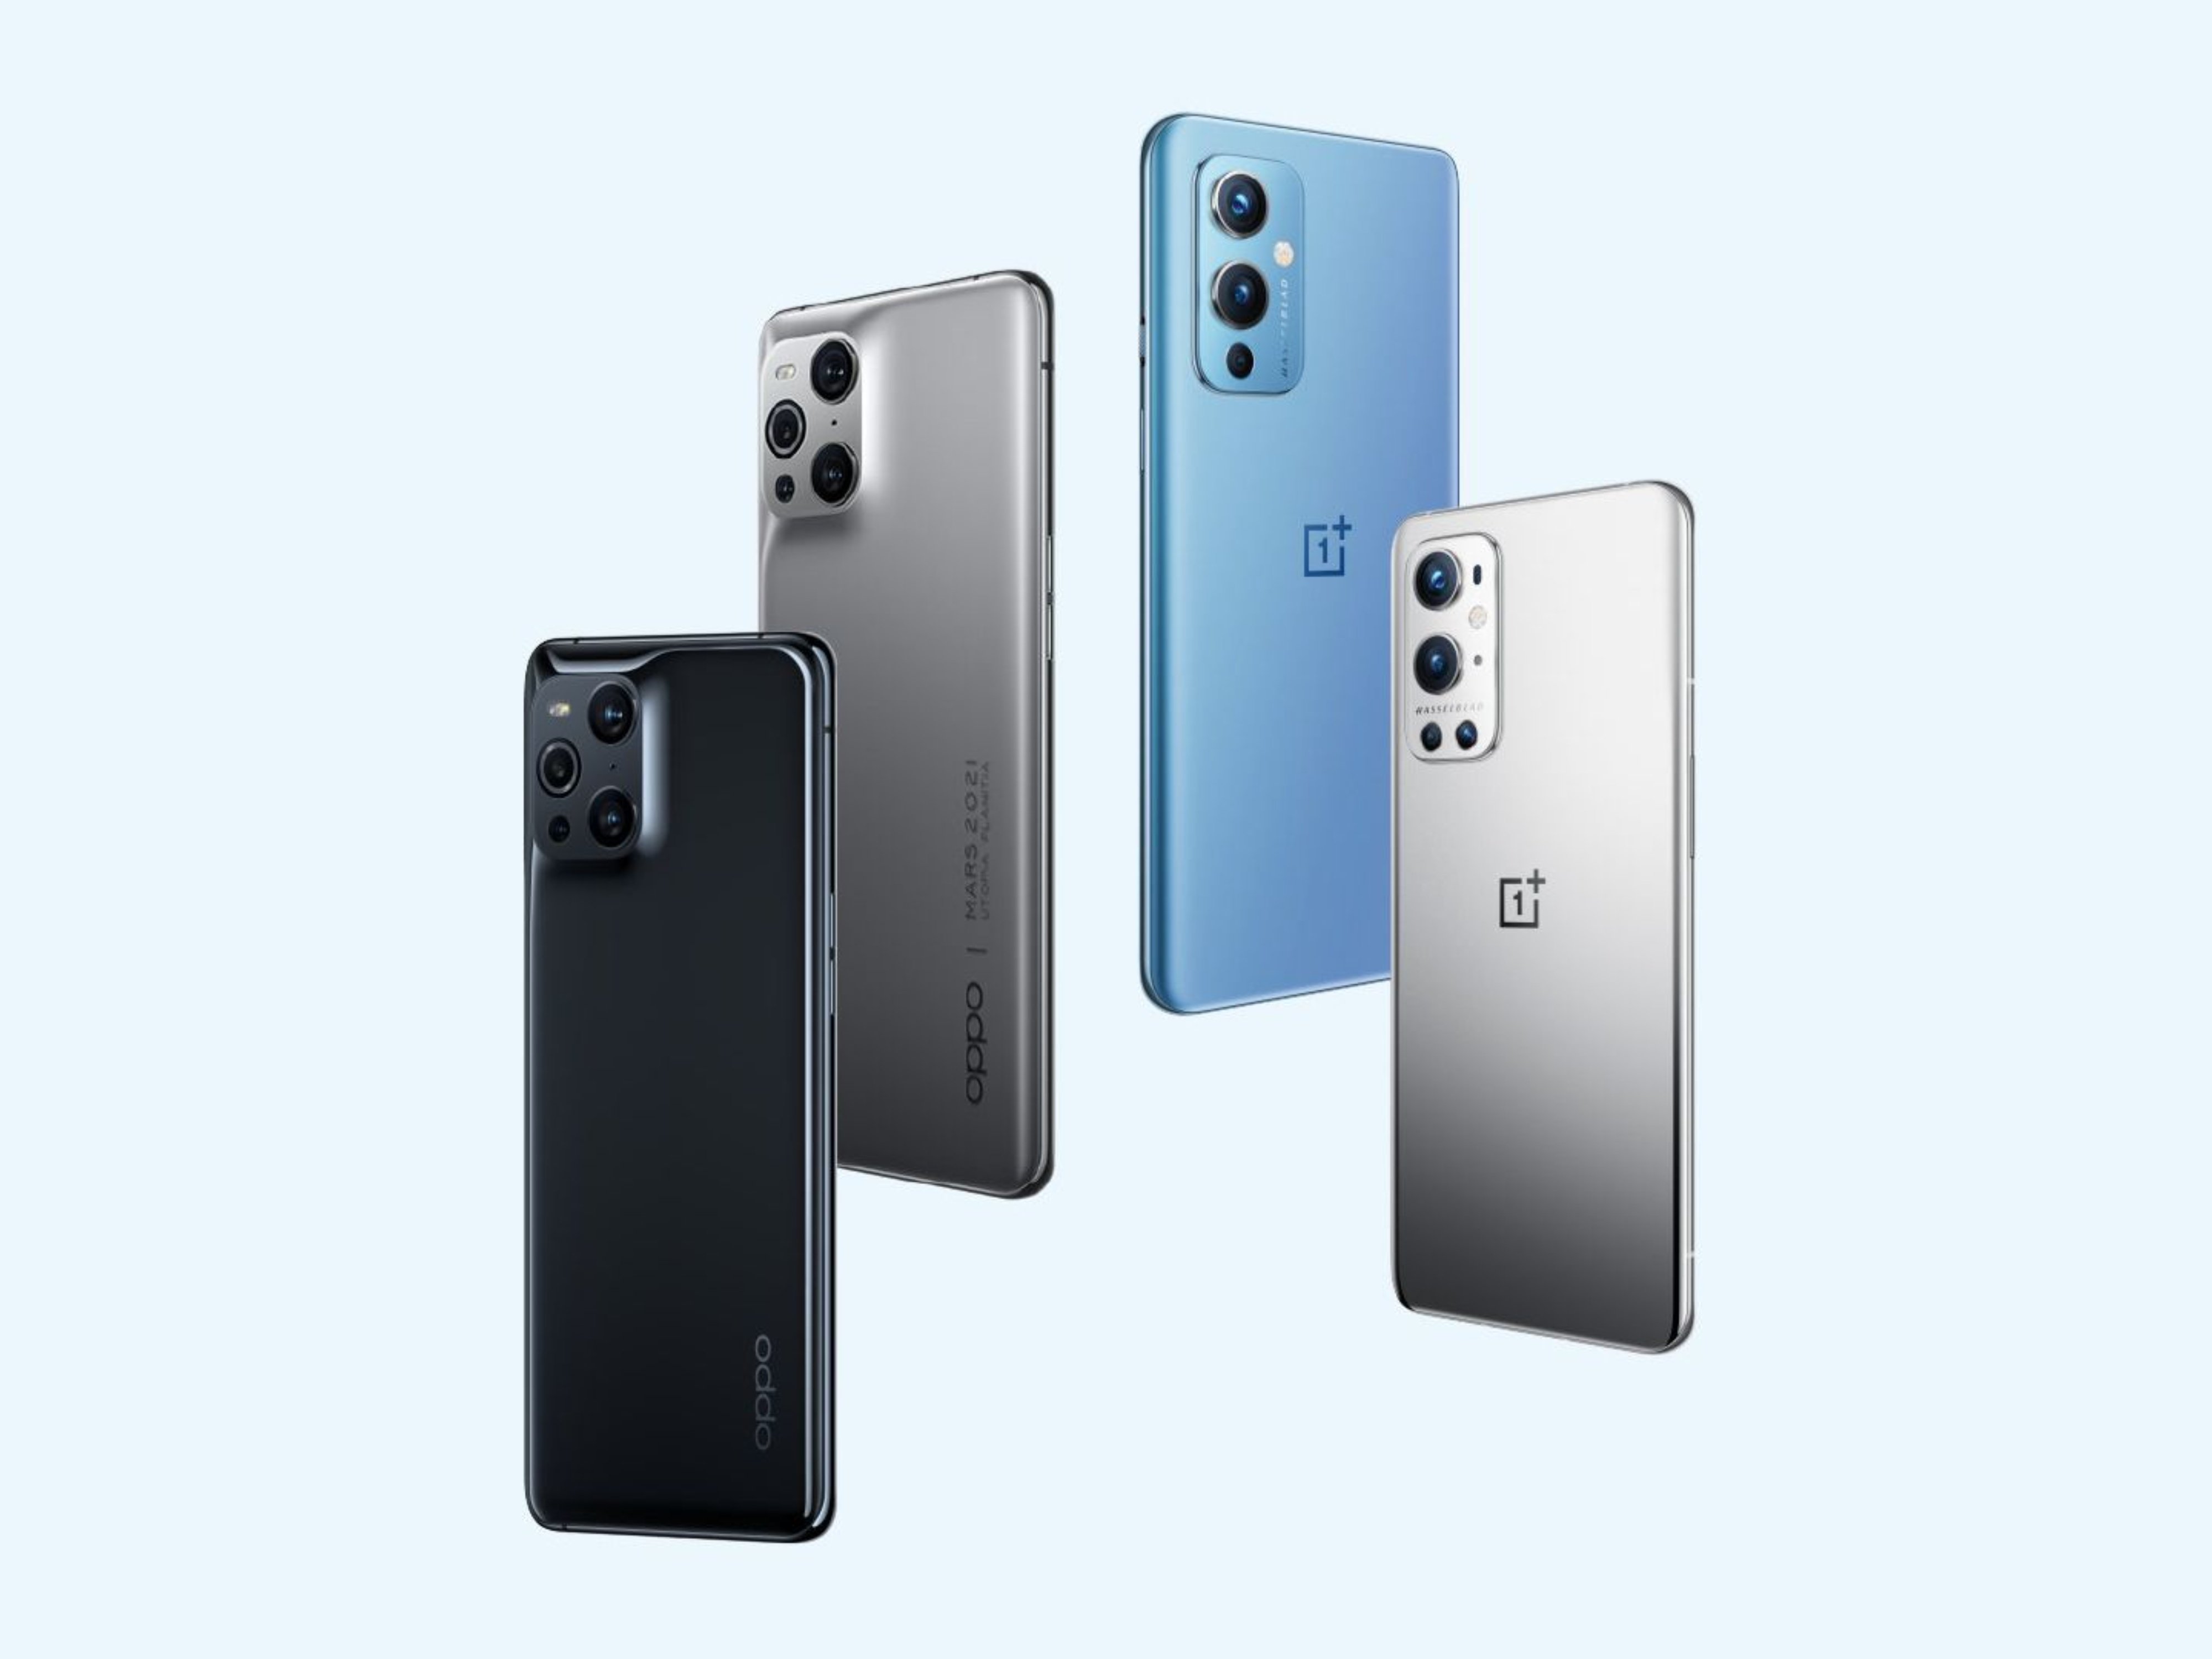 OnePlus 9 Pro OPPO Find X3 Pro Featured